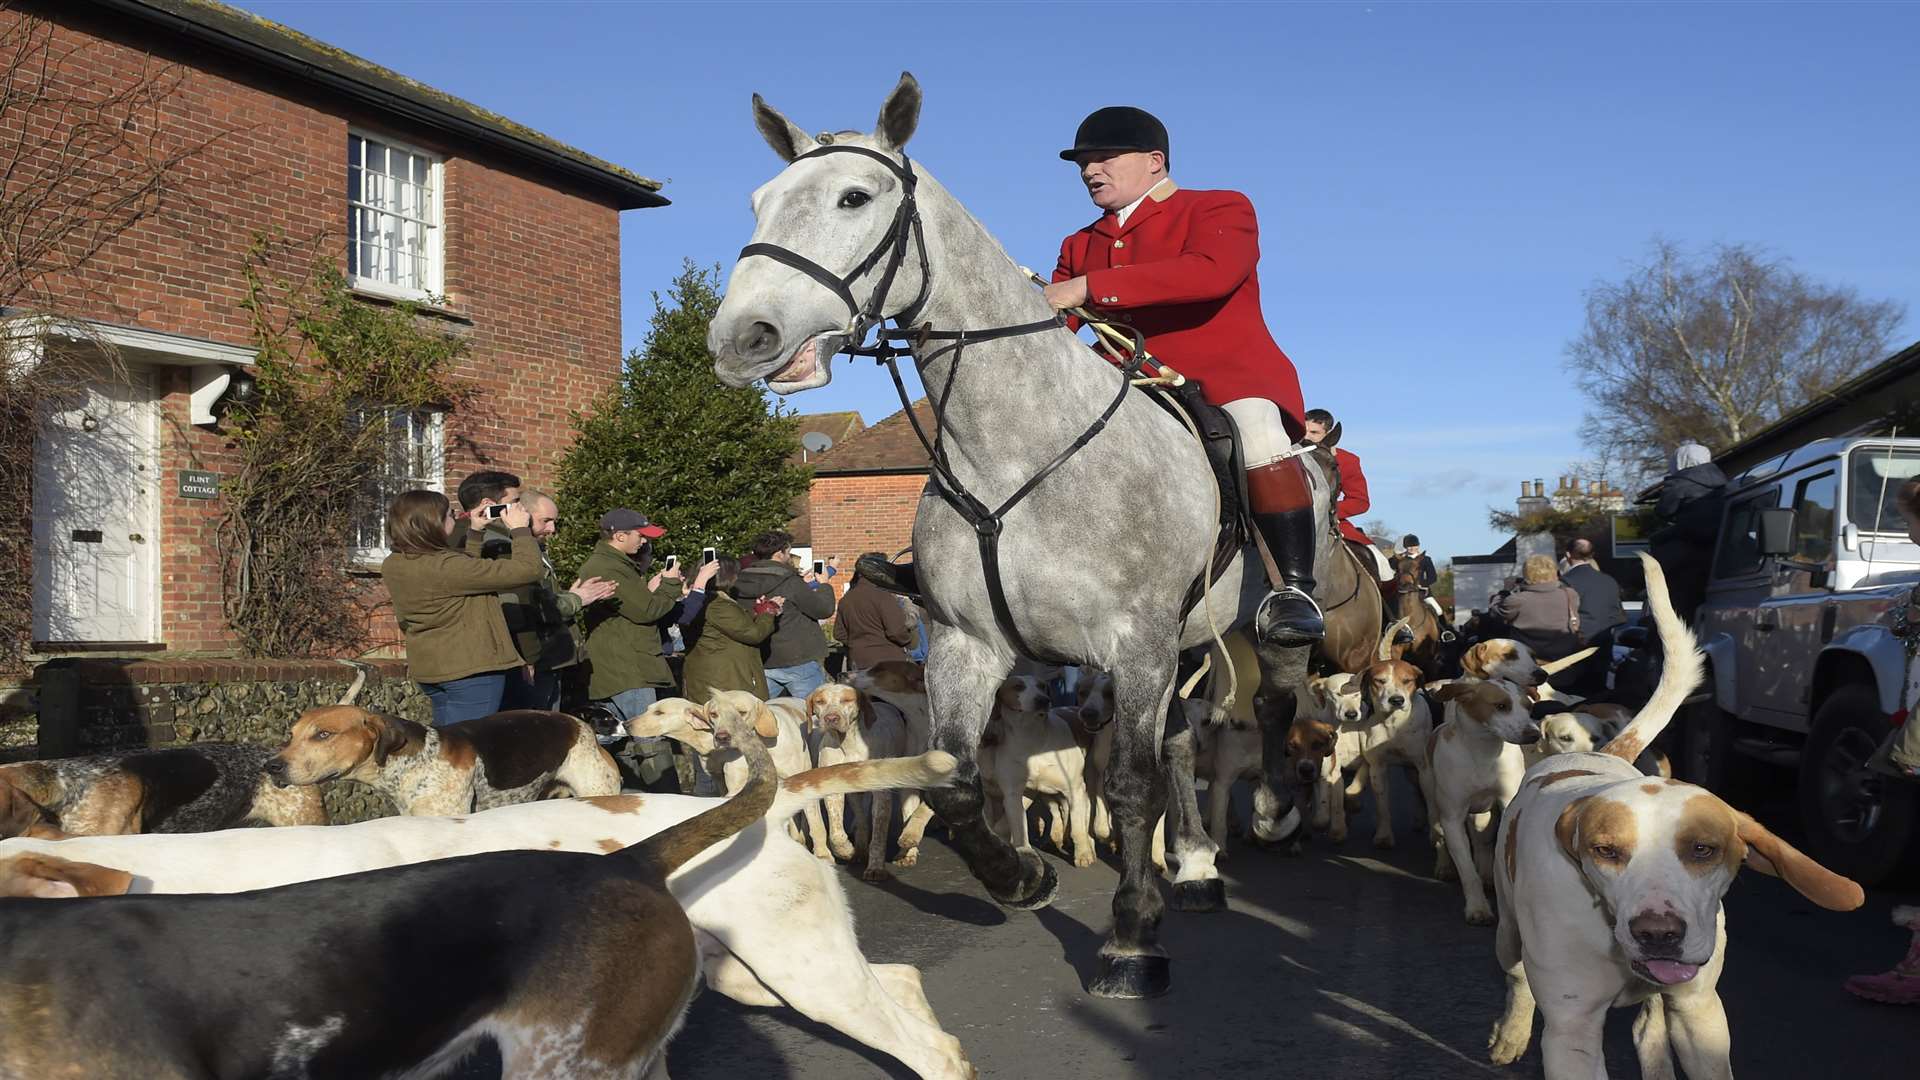 The annual Boxing Day Hunt meet in Elham village